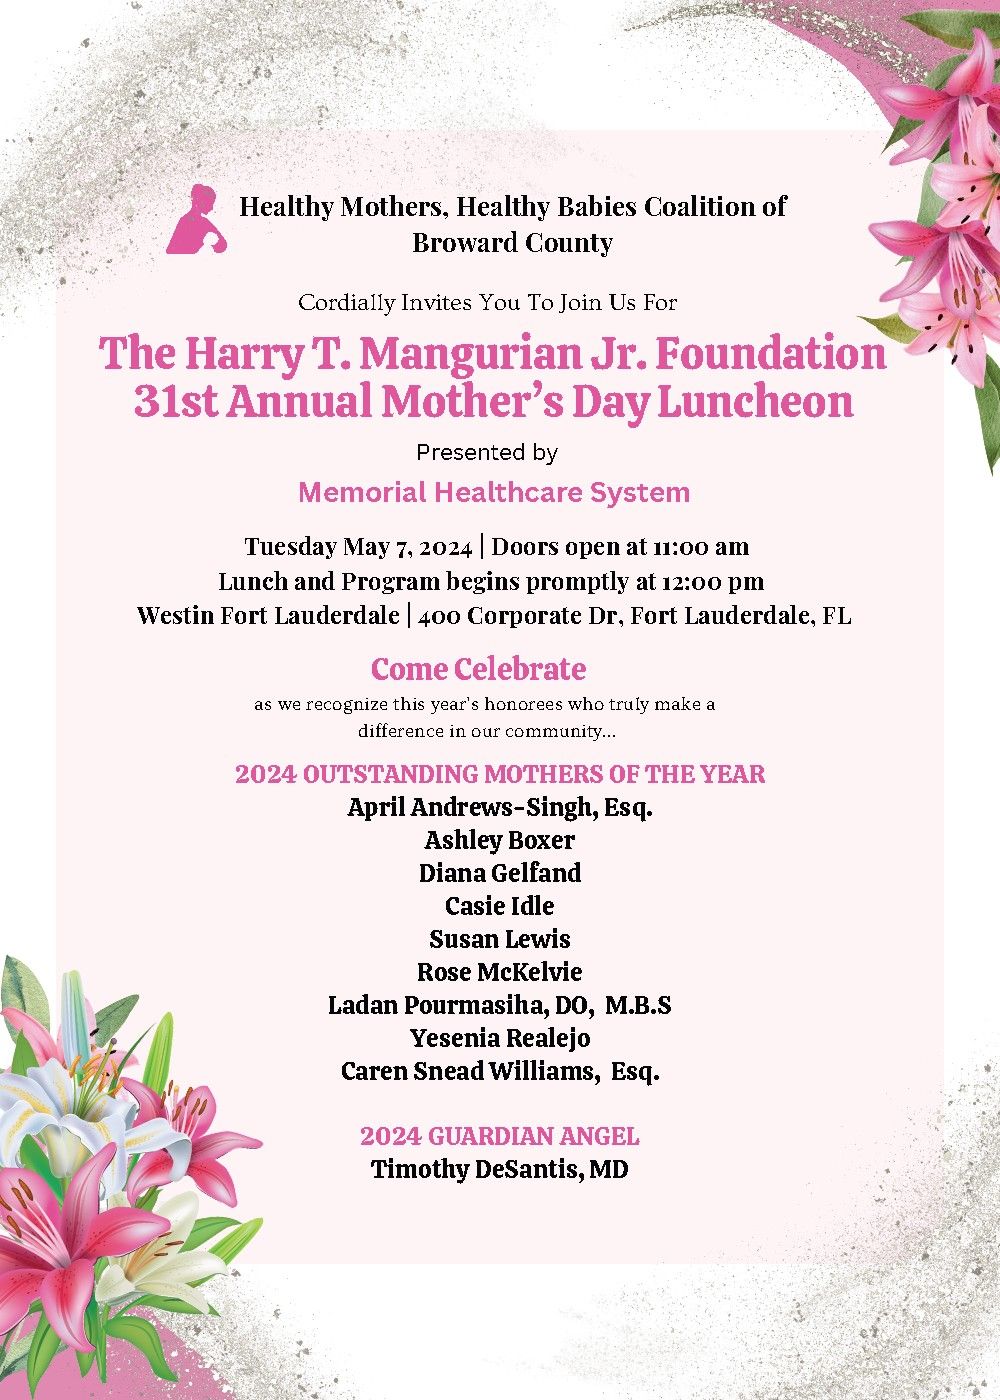 HMHB'S 31st Annual Mother's Day Luncheon